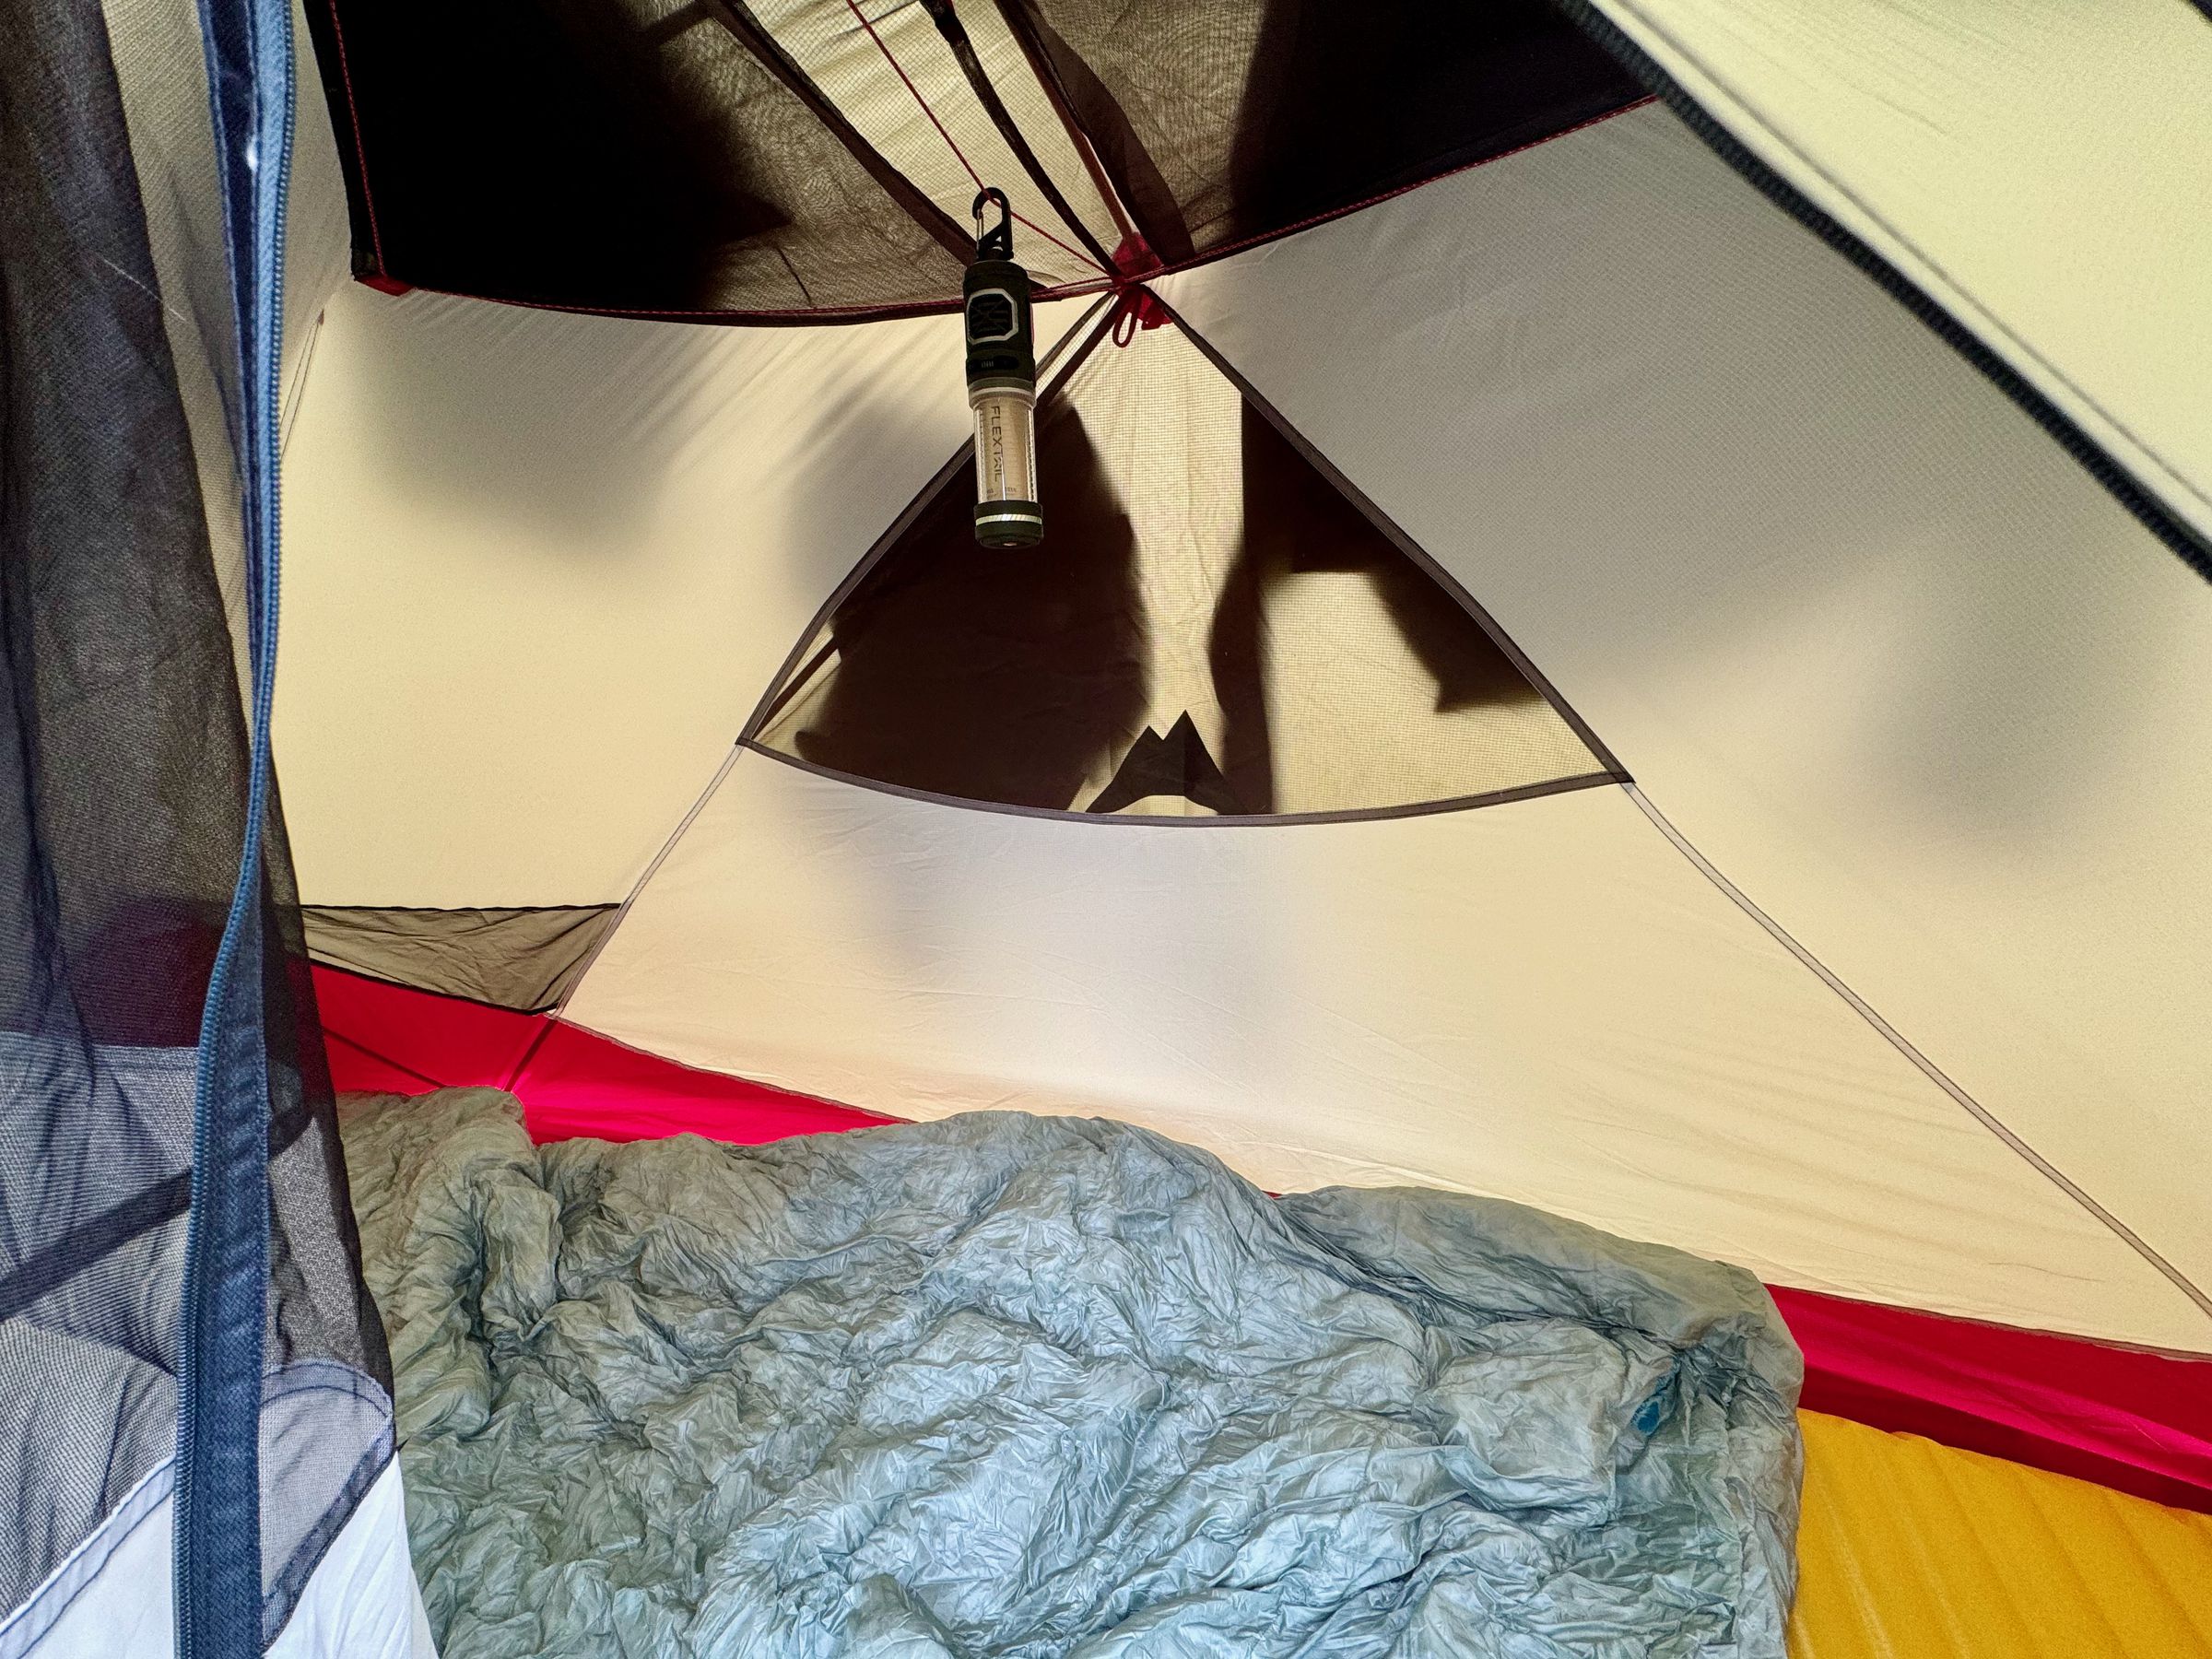 <em>You can see the clotheslines and a corner pocket on the left. The Thermarest sleeping pad and quilt fit nicely inside without being too cramped. A Flextail Tiny Repeller S combo bug repeller and lamp is hanging from the clothesline.</em>